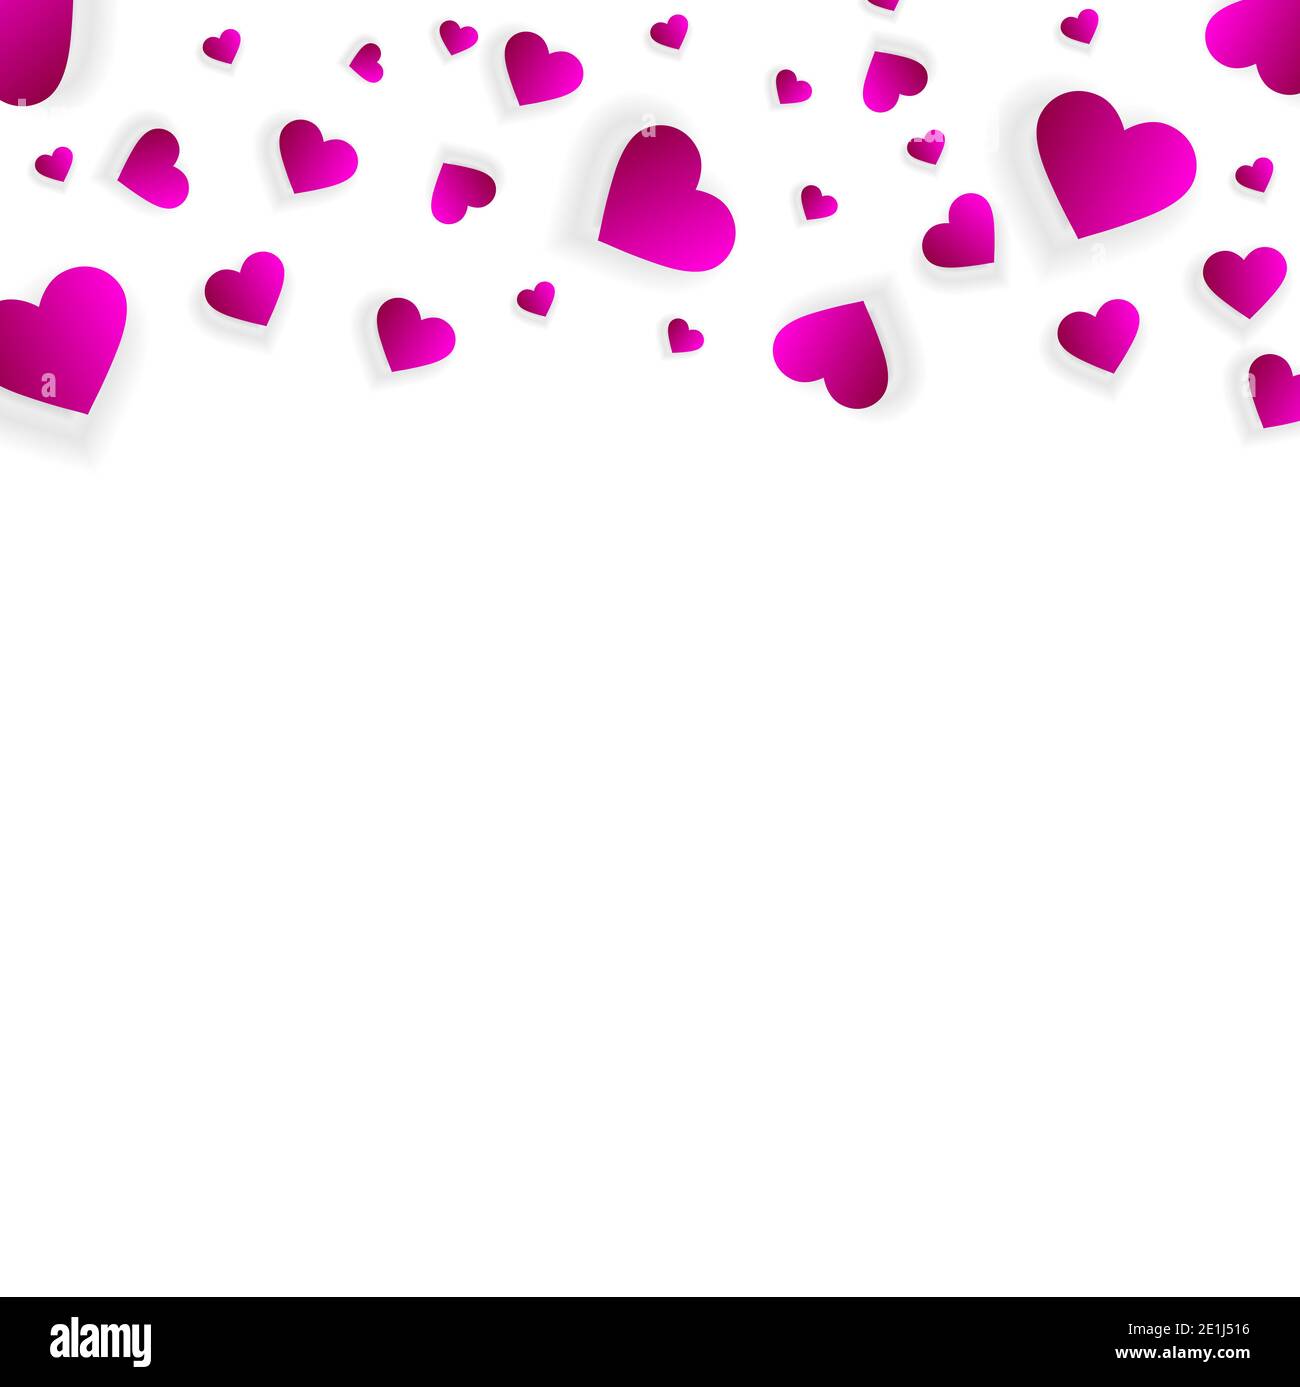 Love border with falling pink hearts,  frame with scatter confetti petals. Horizontal up bordering pattern for Valentines day or wedding invitation ca Stock Photo